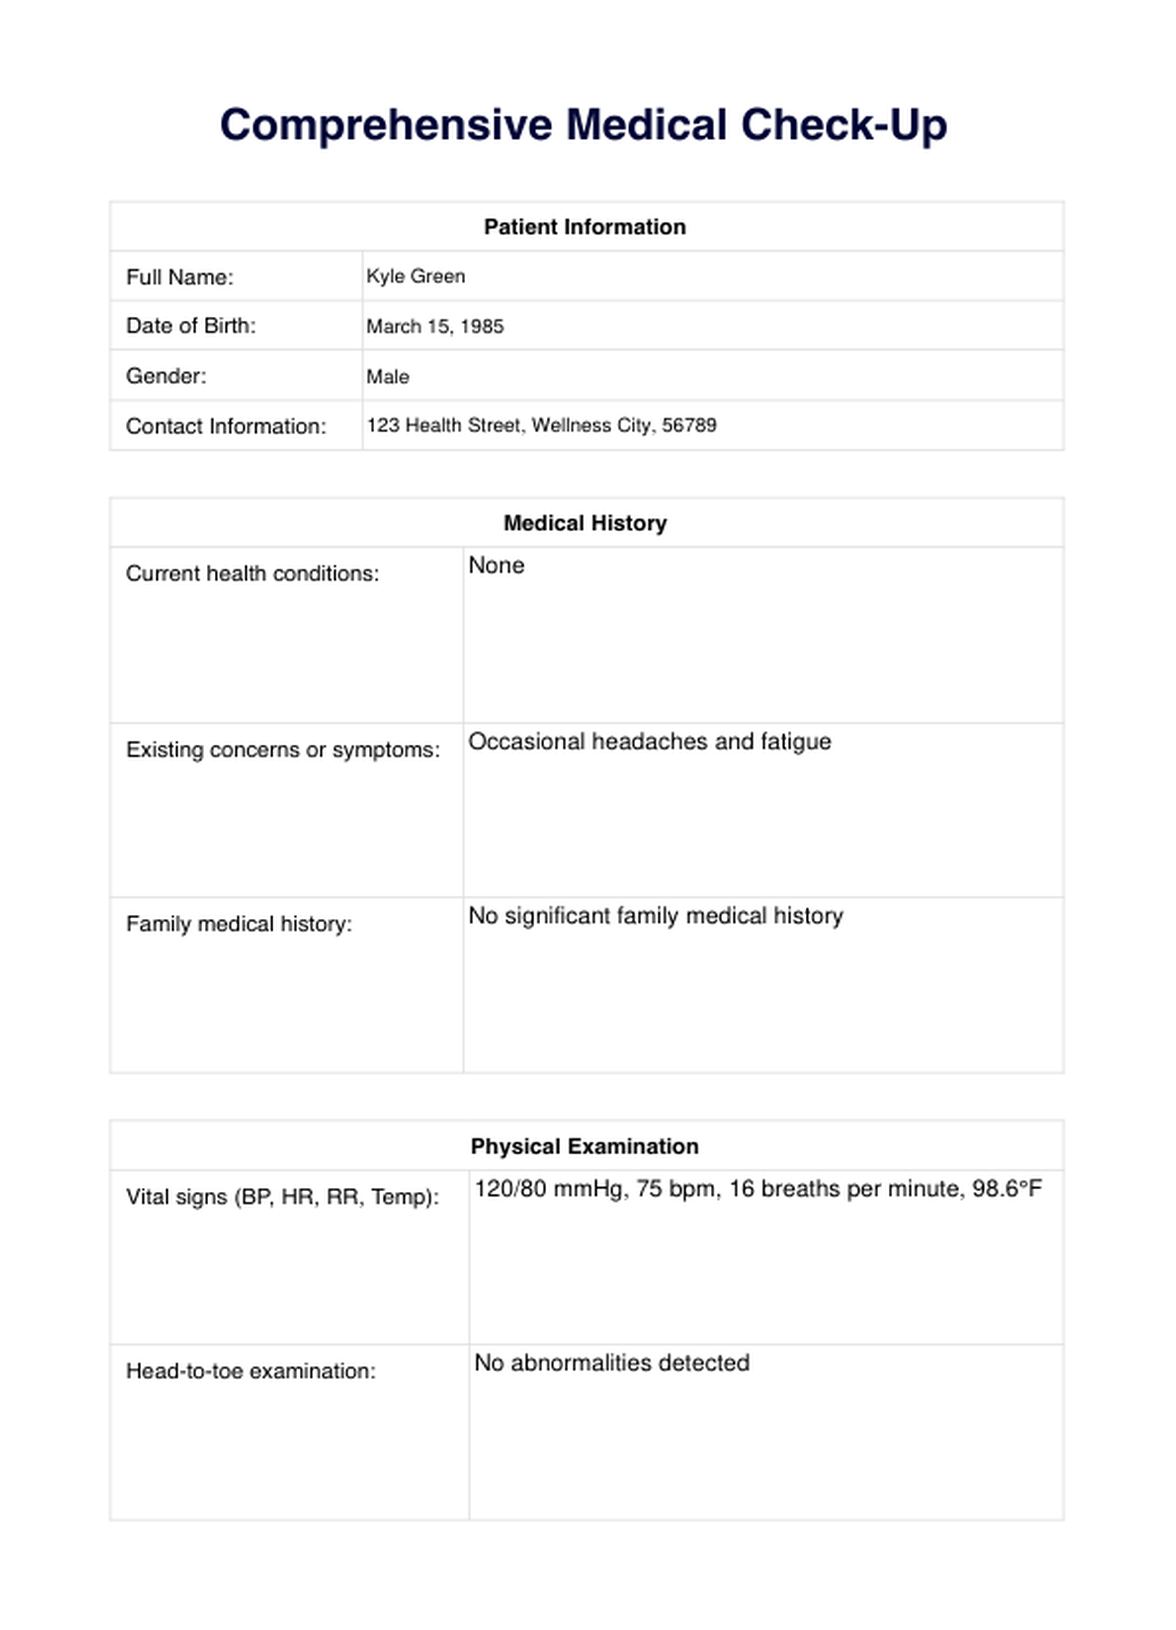 Comprehensive Medical Check Up PDF Example